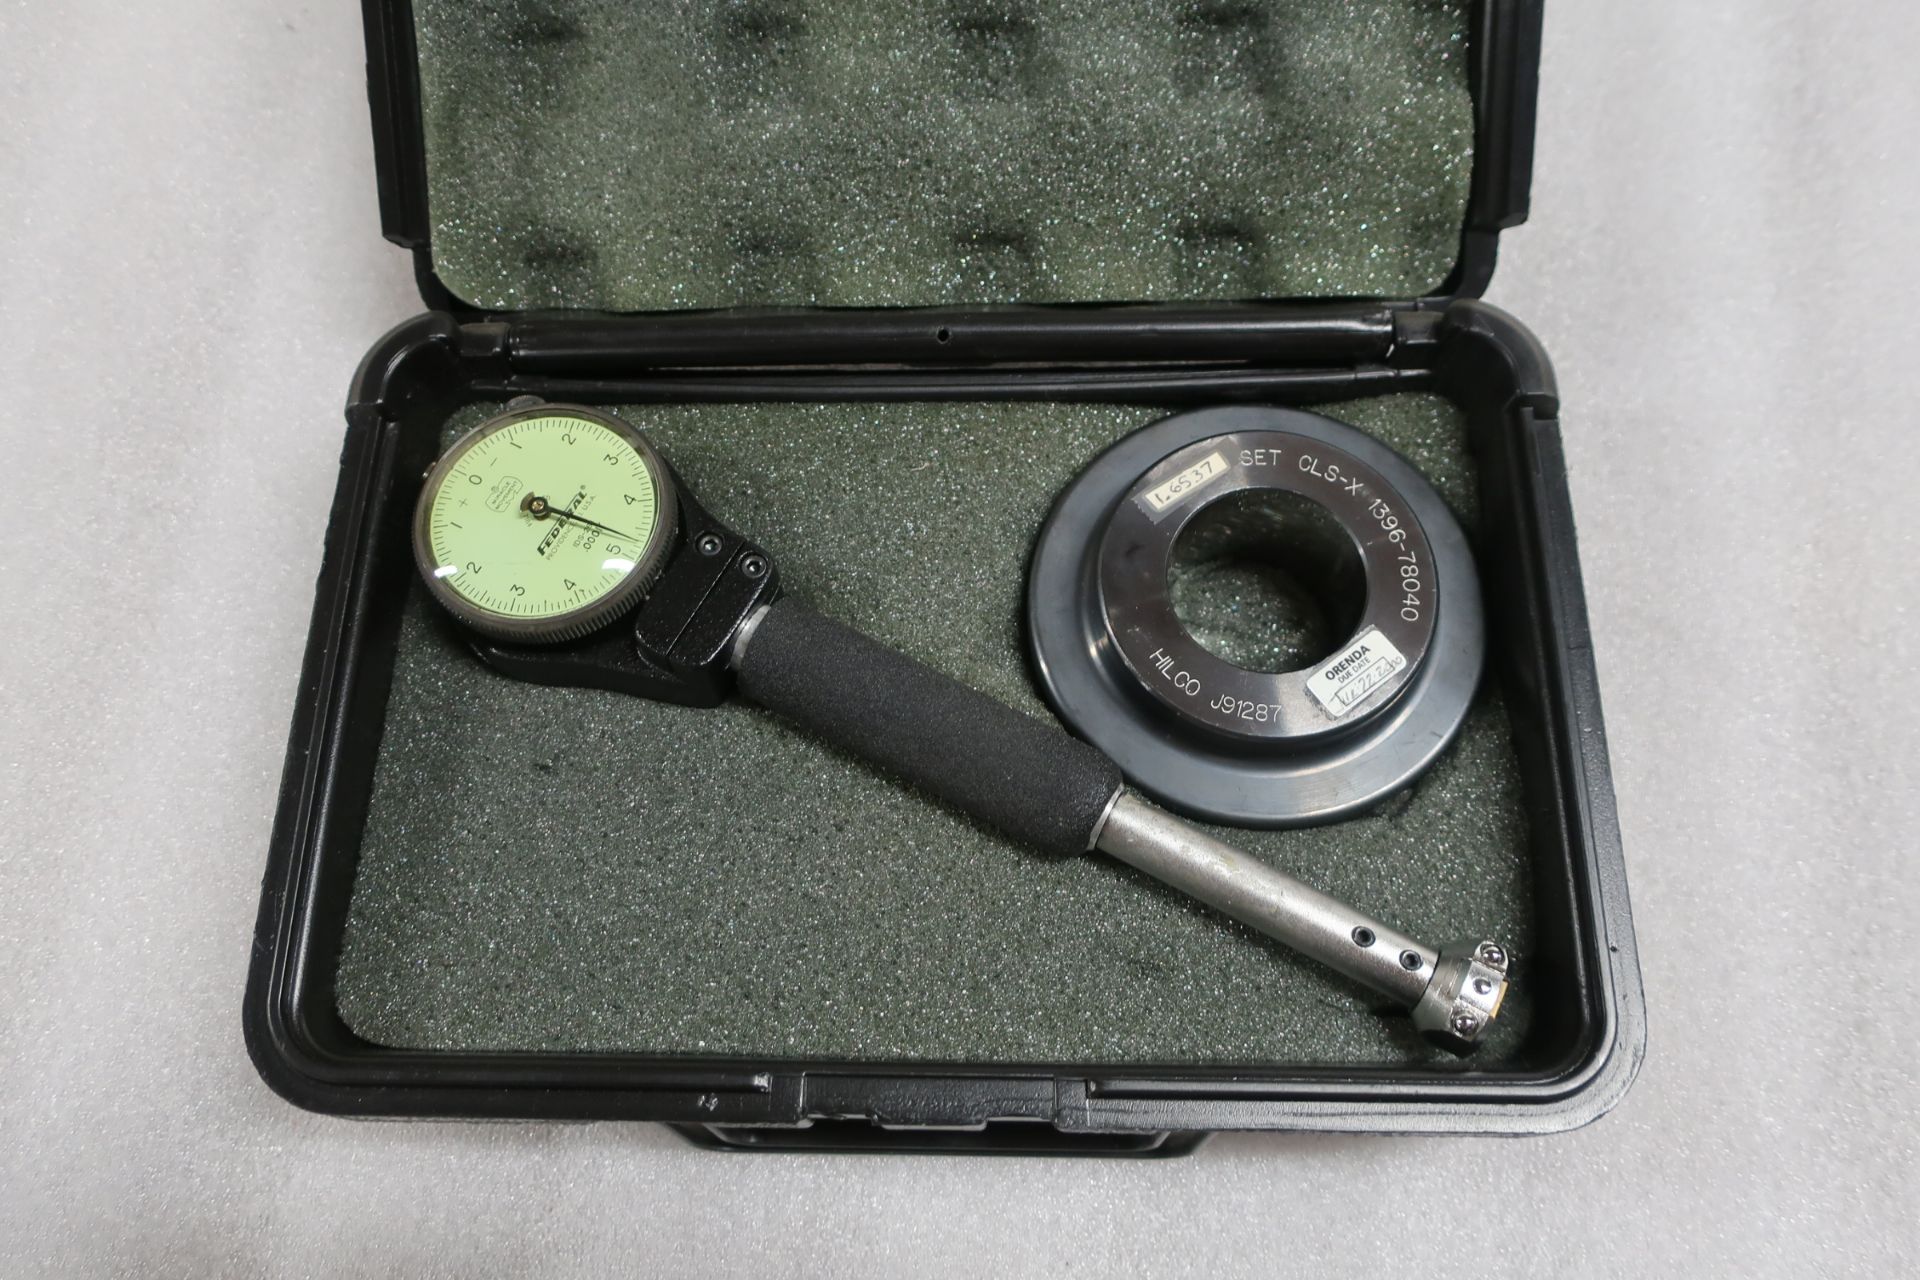 Federal Dial Bore Gauge with Ring Calibration standard included in case